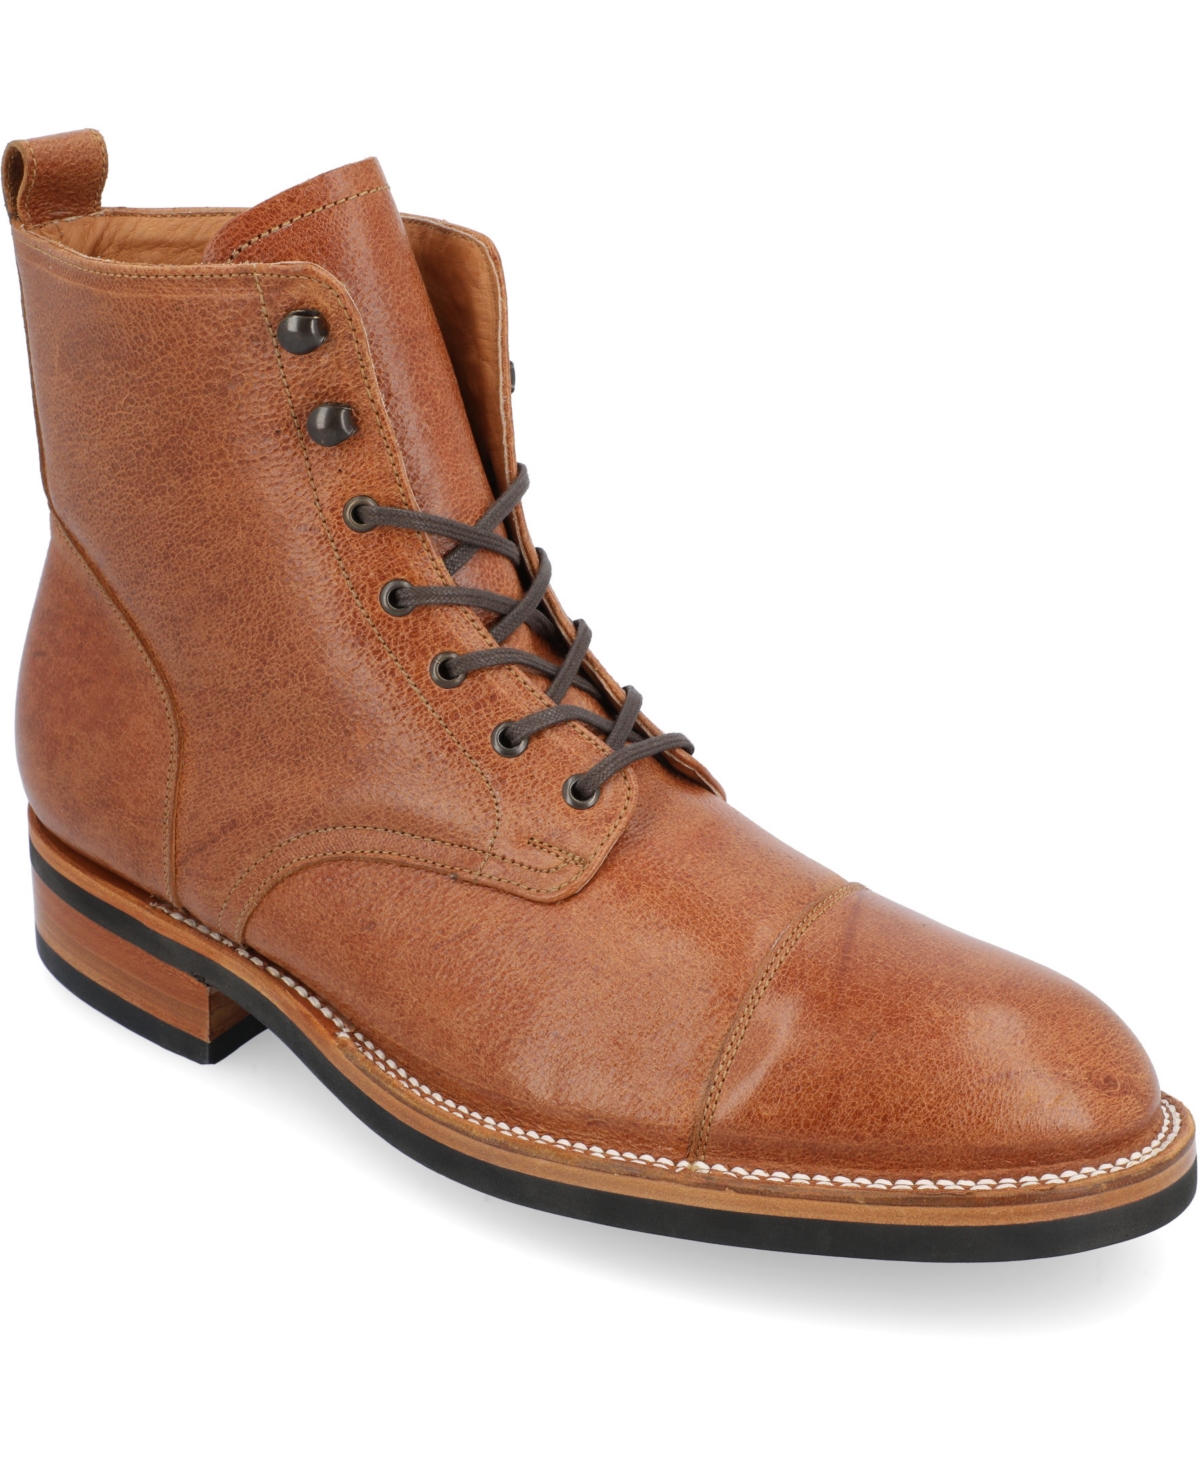 Men's Legacy Lace-up Rugged Stitchdown Captoe Boot - Nutmeg